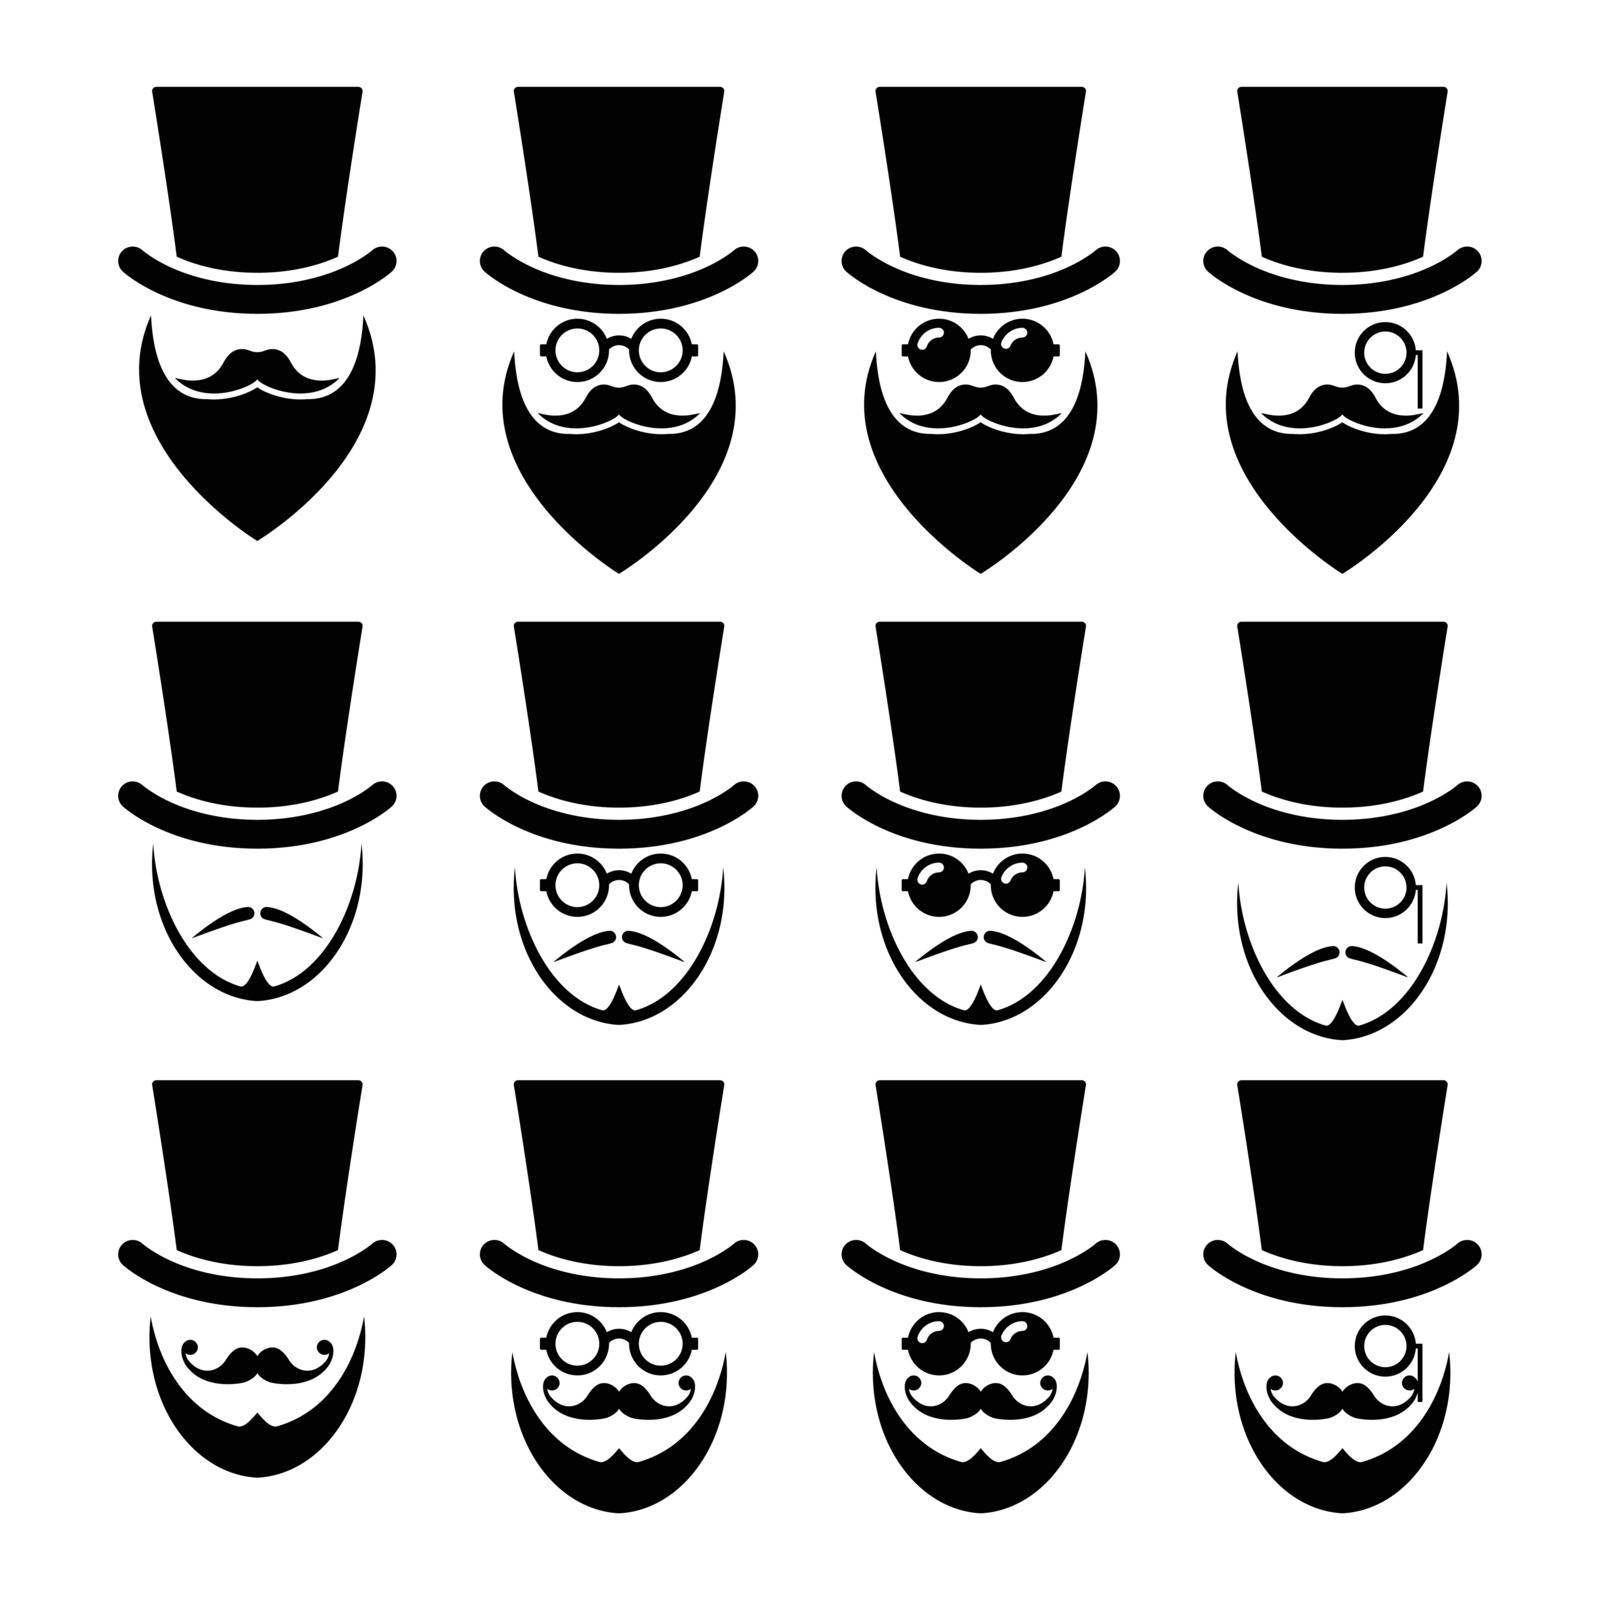 Man with hat with beard and glasses icons set by RedKoala